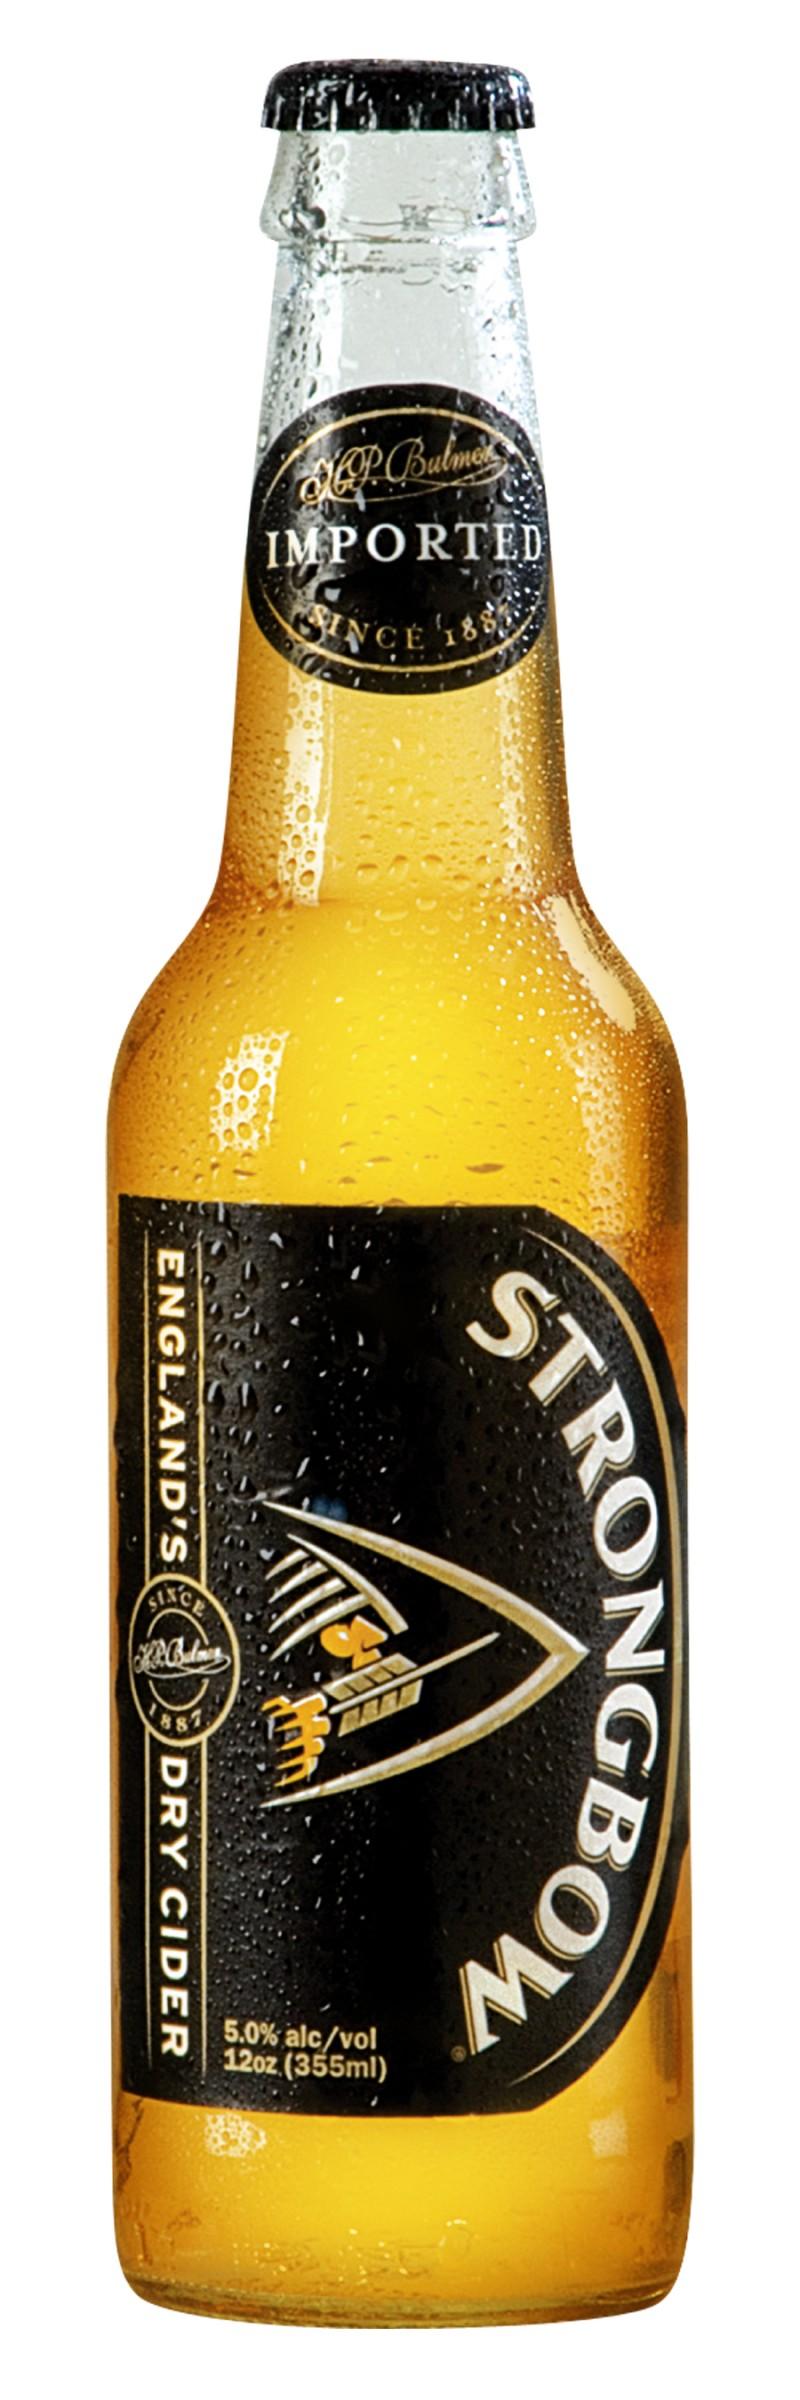 A+bottle+of+Strongbow%2C+a+popular+English+cider.